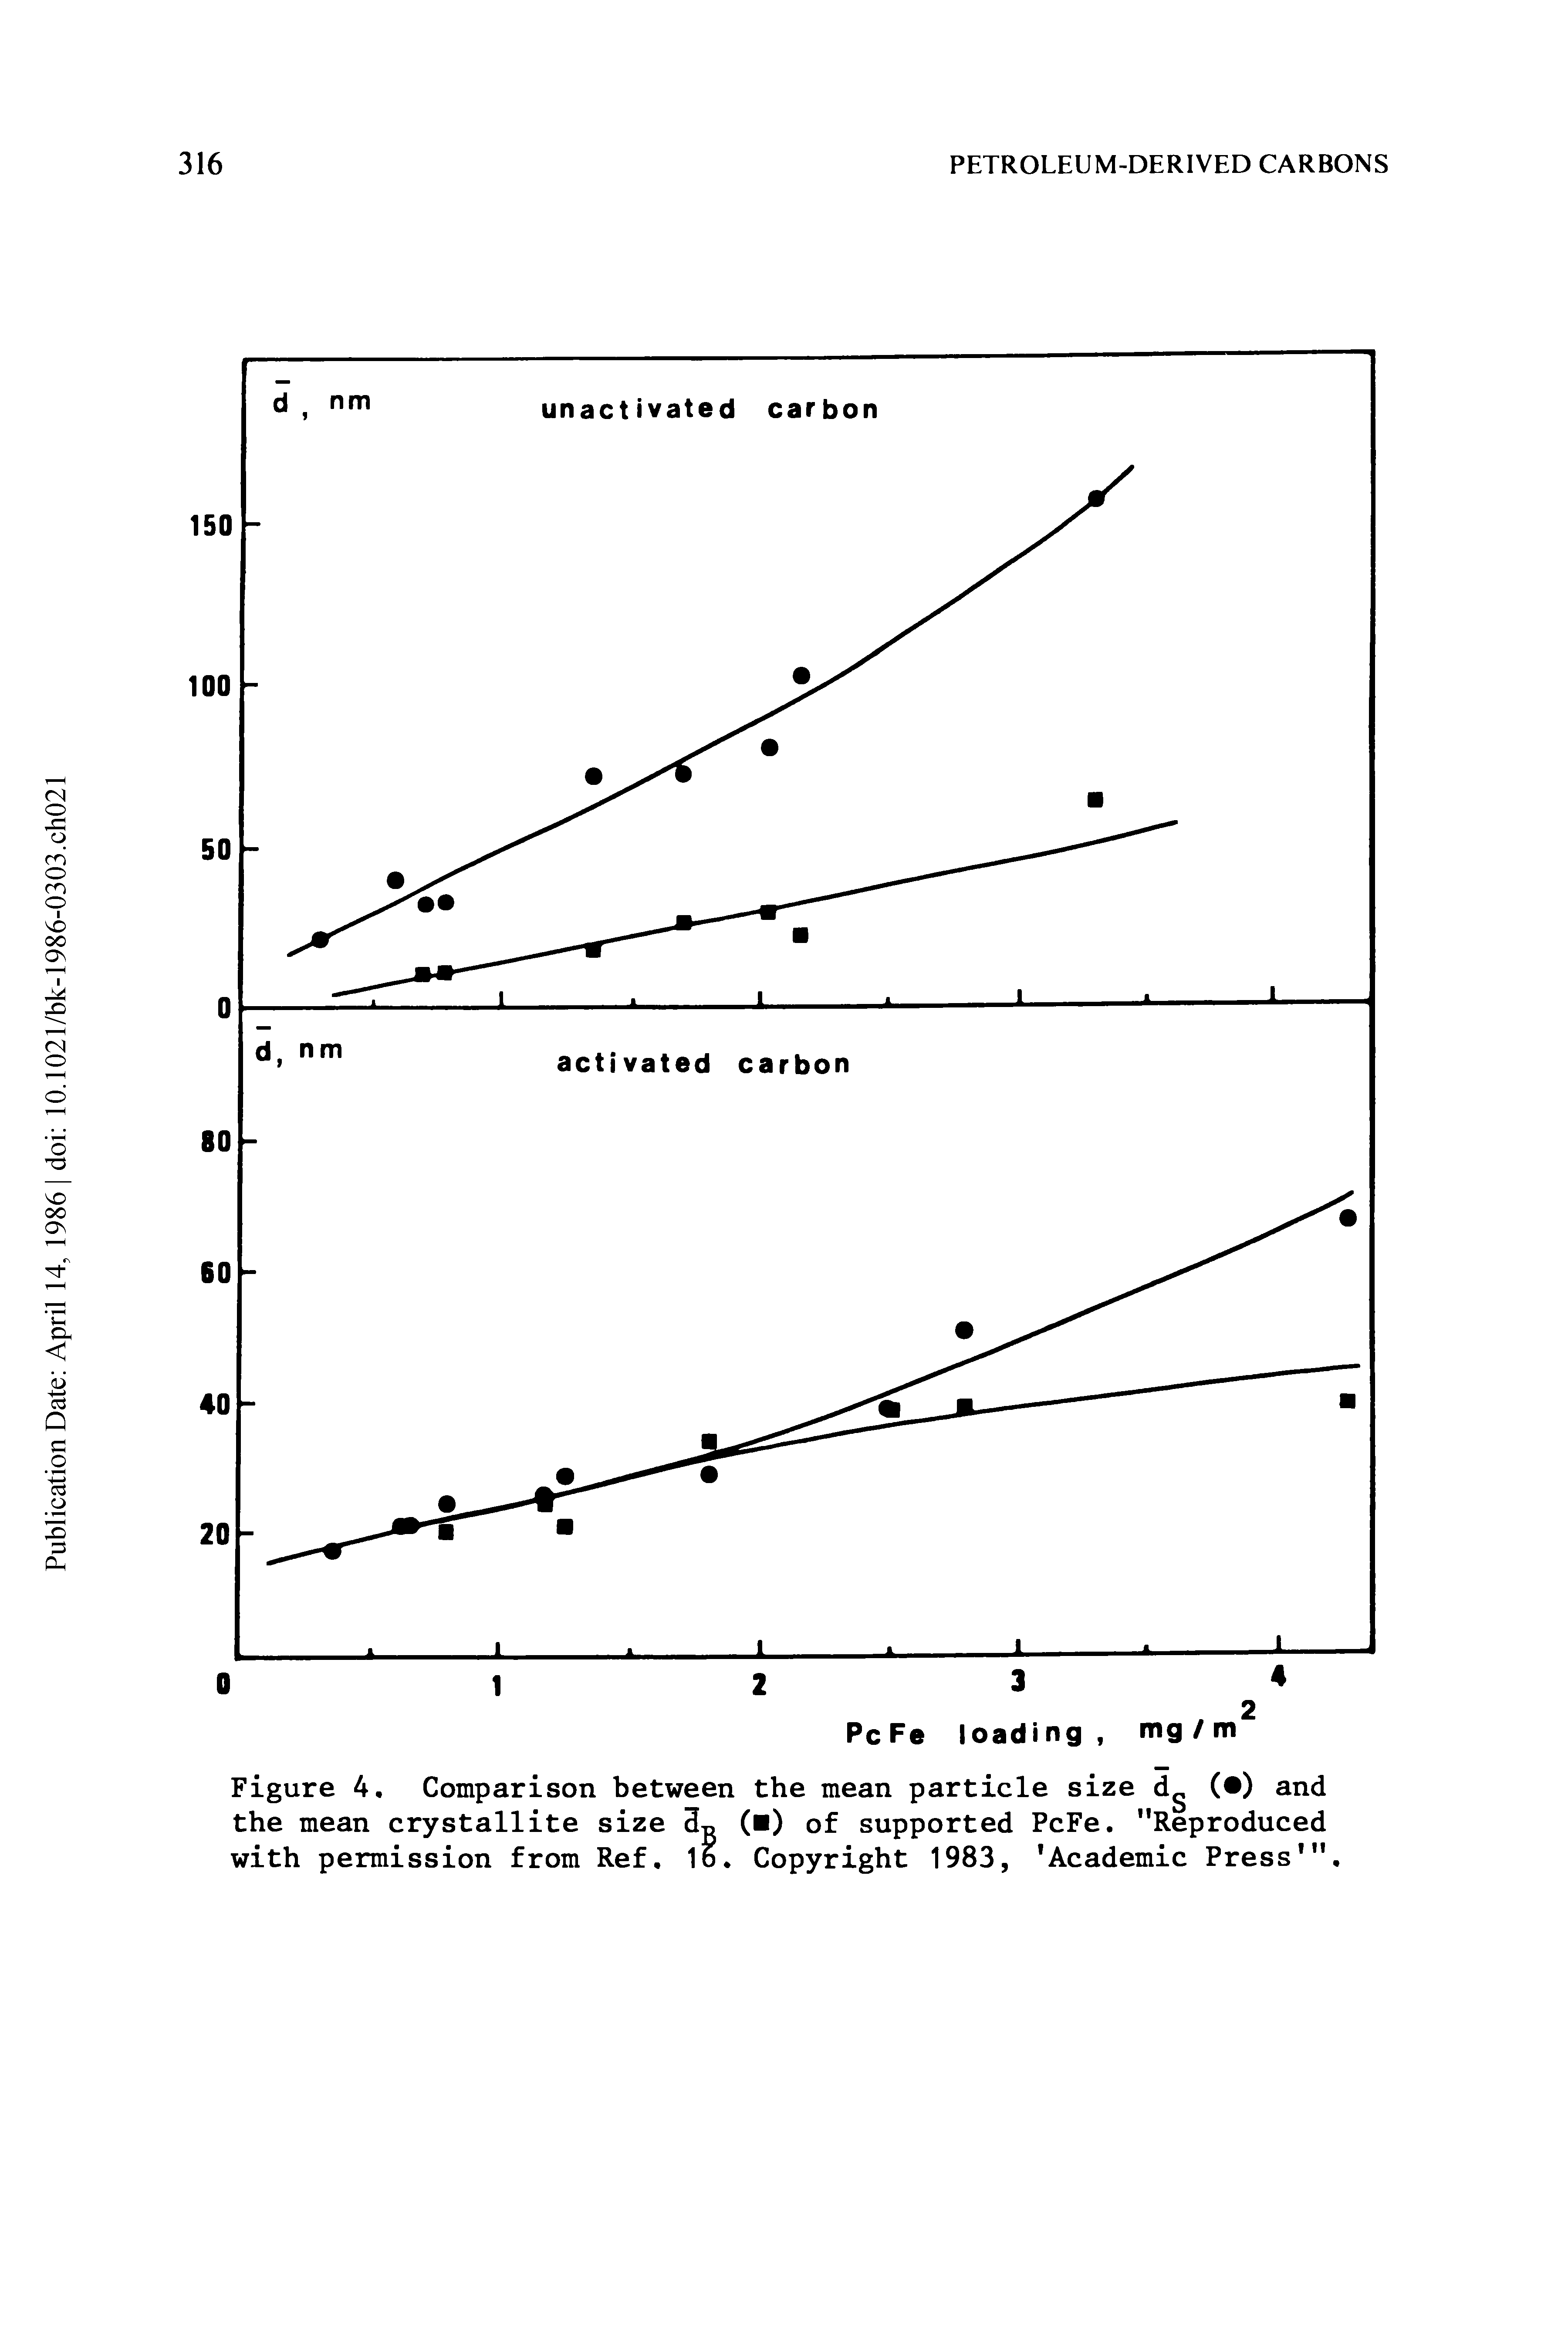 Figure 4. Comparison between the mean particle size dg ( ) and the mean crystallite size 3 ( ) of supported PcFe. "Reproduced with permission from Ref. 16. Copyright 1983, Academic Press1".